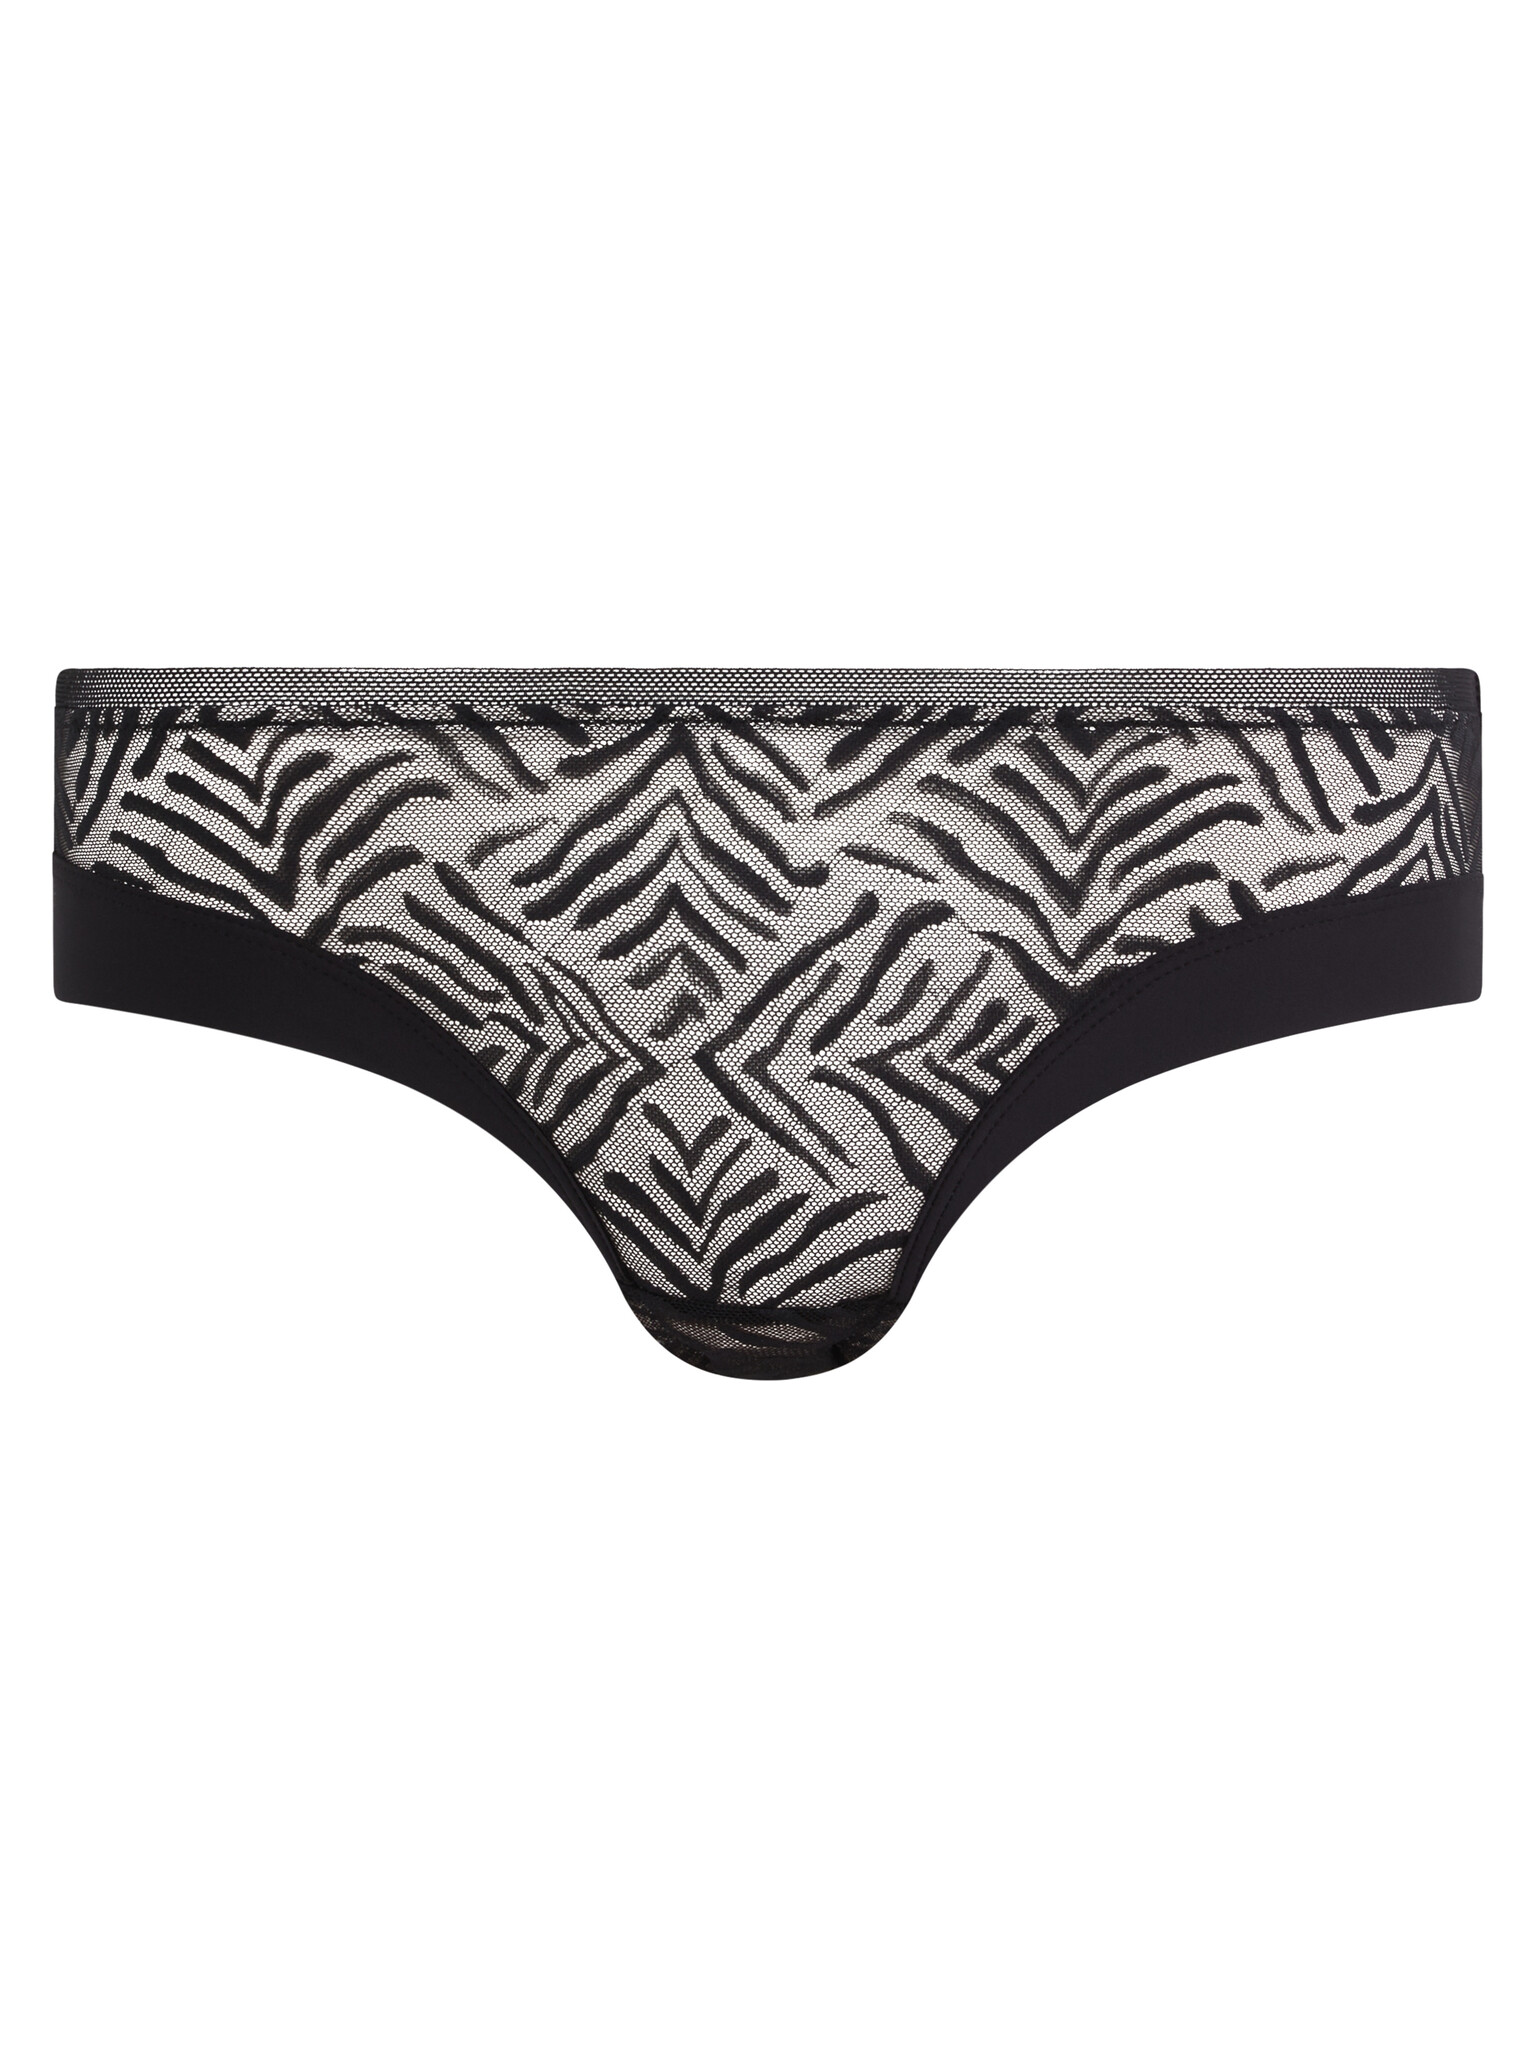 Graphic Allure Hipster Panty C21T40 Black (11) - Lace & Day